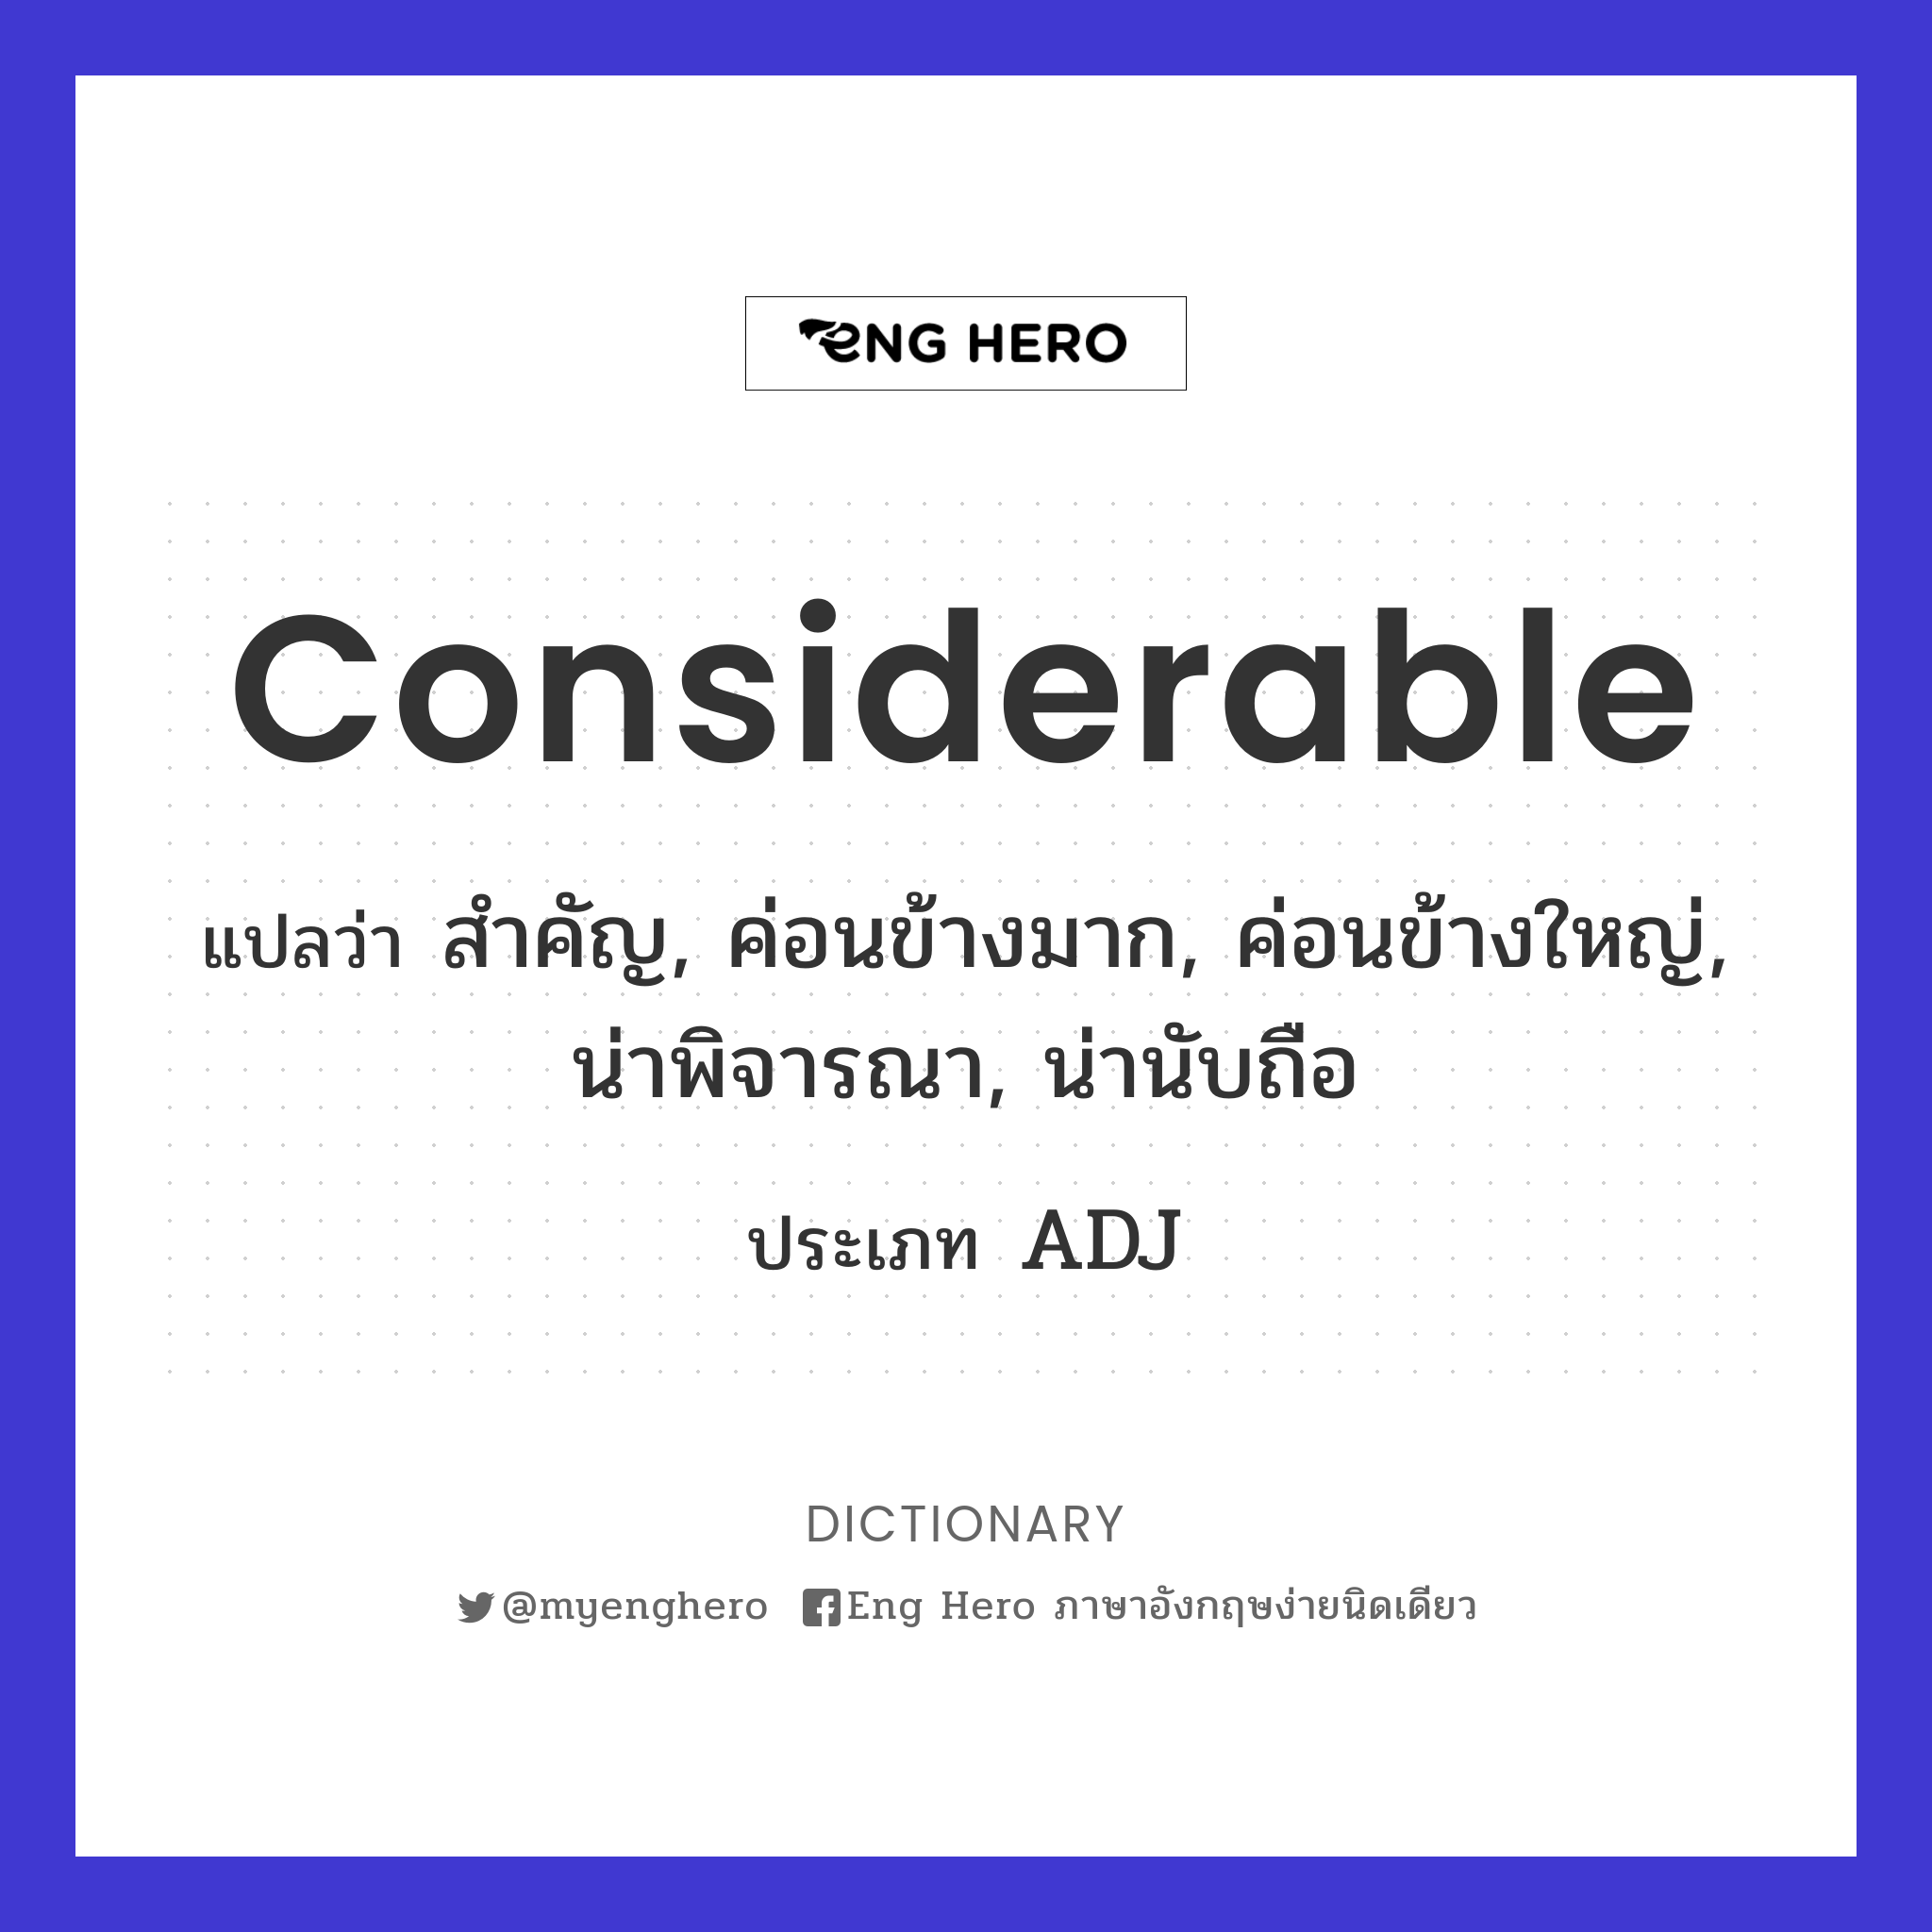 considerable